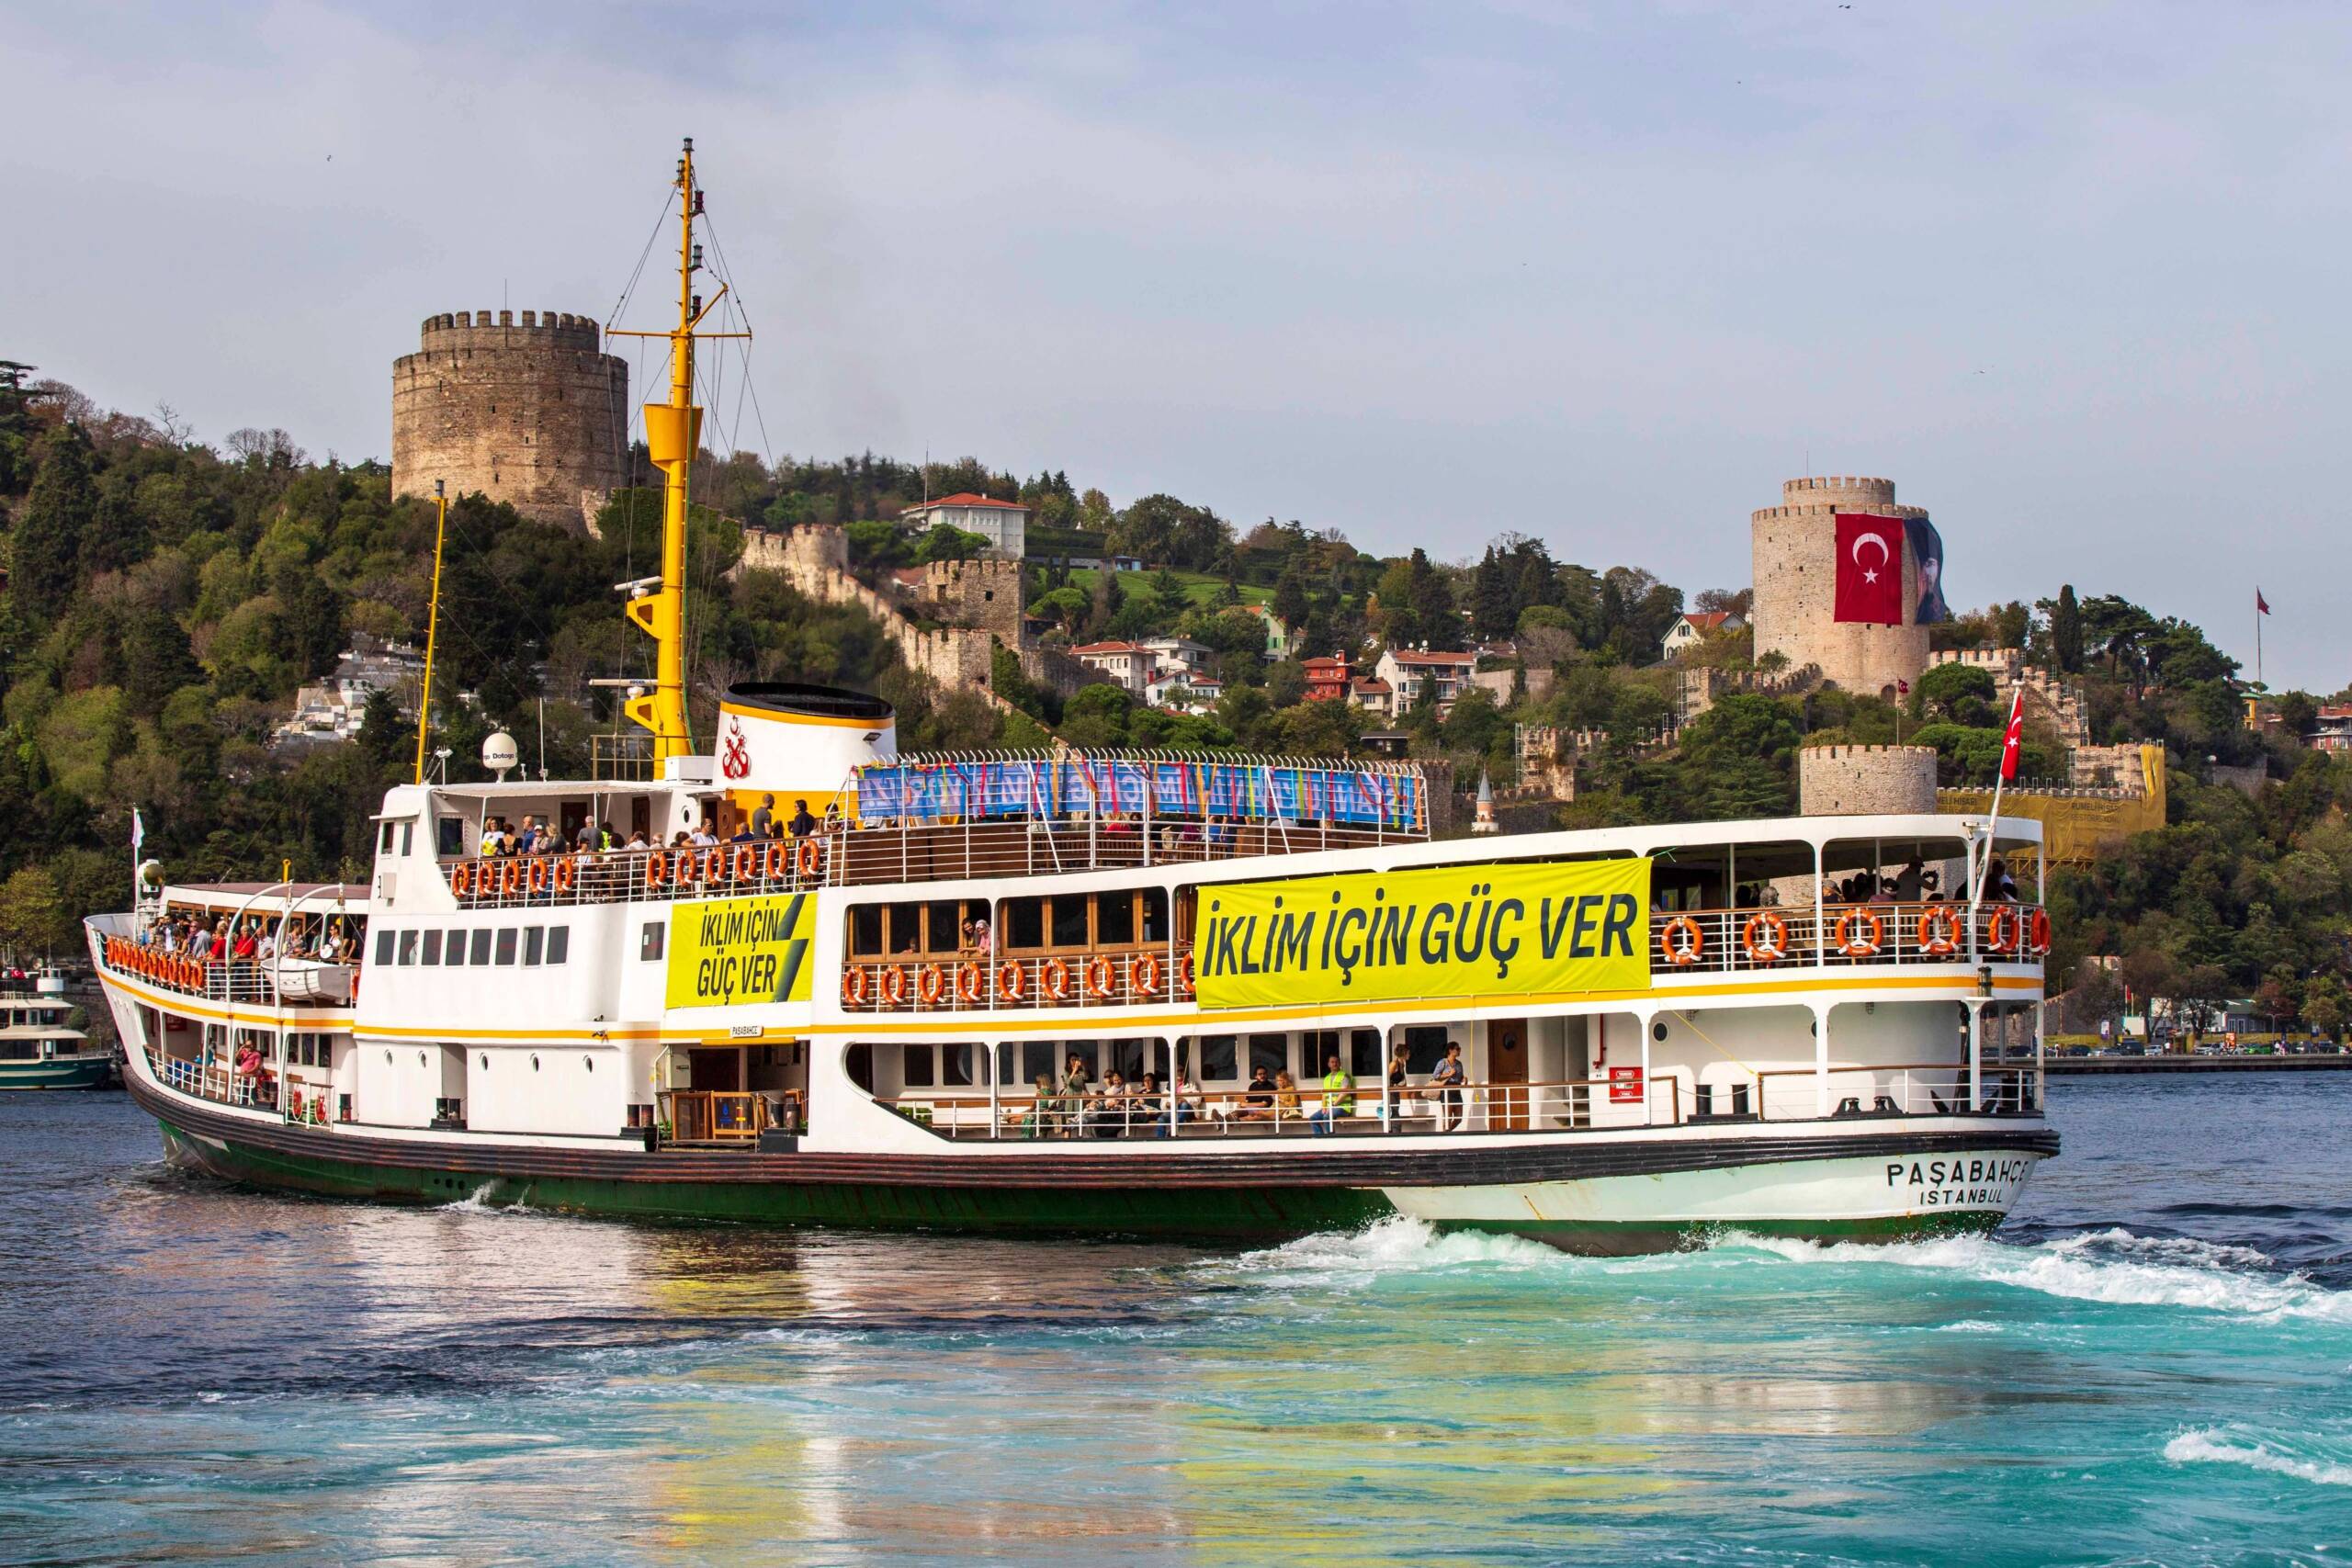 Istanbul, Turkey, November 4: 350 Türkiye turns one of the traditional Bosphorus ferries into a climate ferry, with workshops and activities held during the trip and demanding a world powered by renewable energy. Photo credit: 350Türkiye